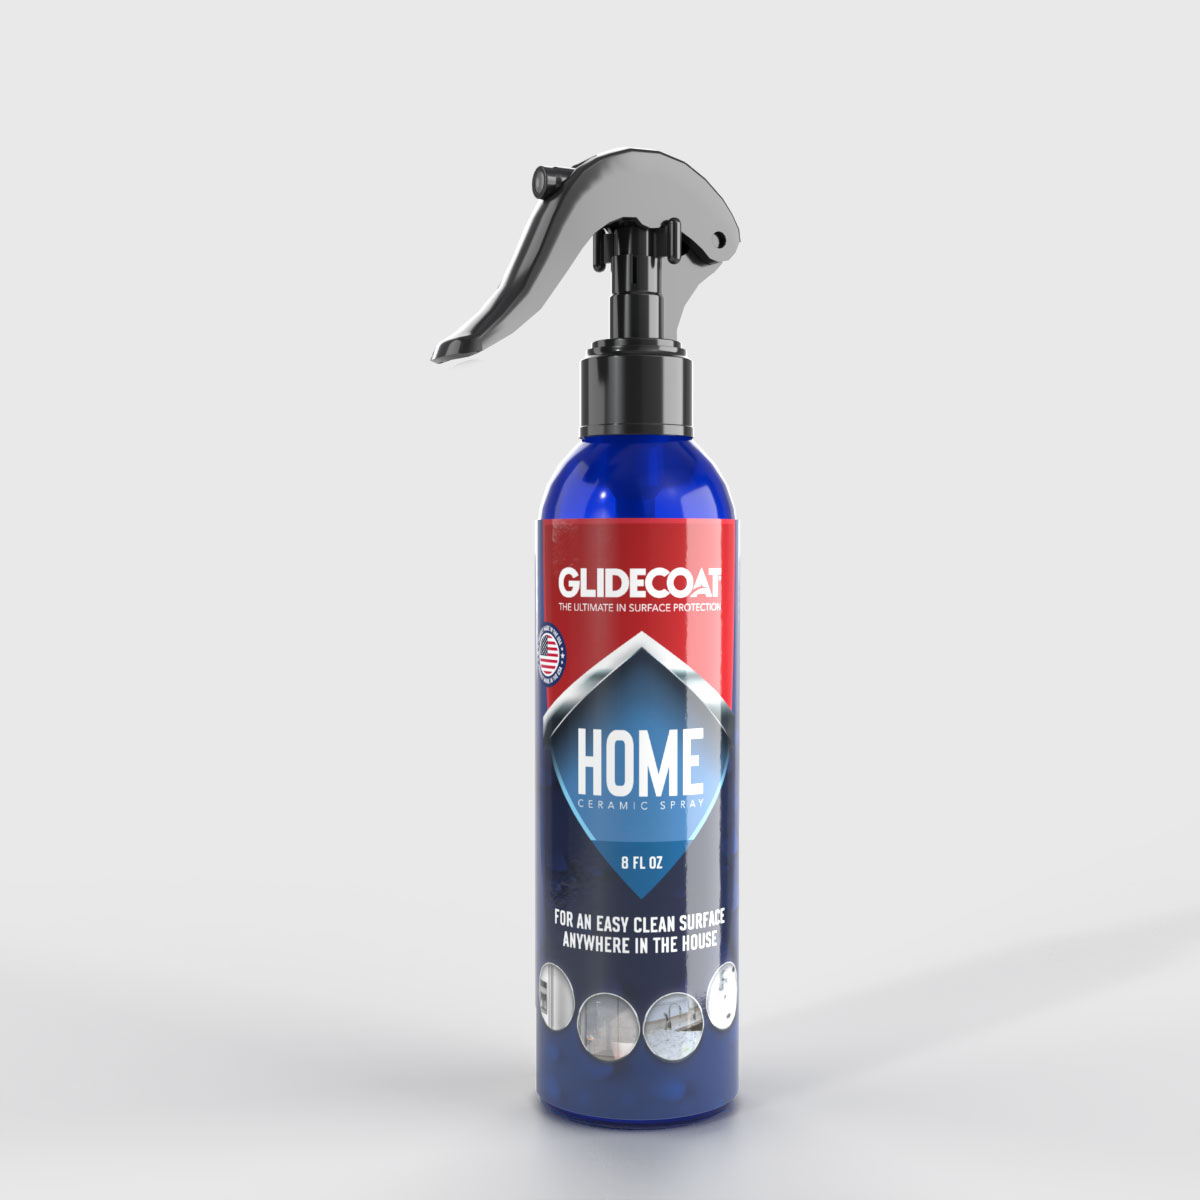 Ceramic Coating Spray for Home and Appliances